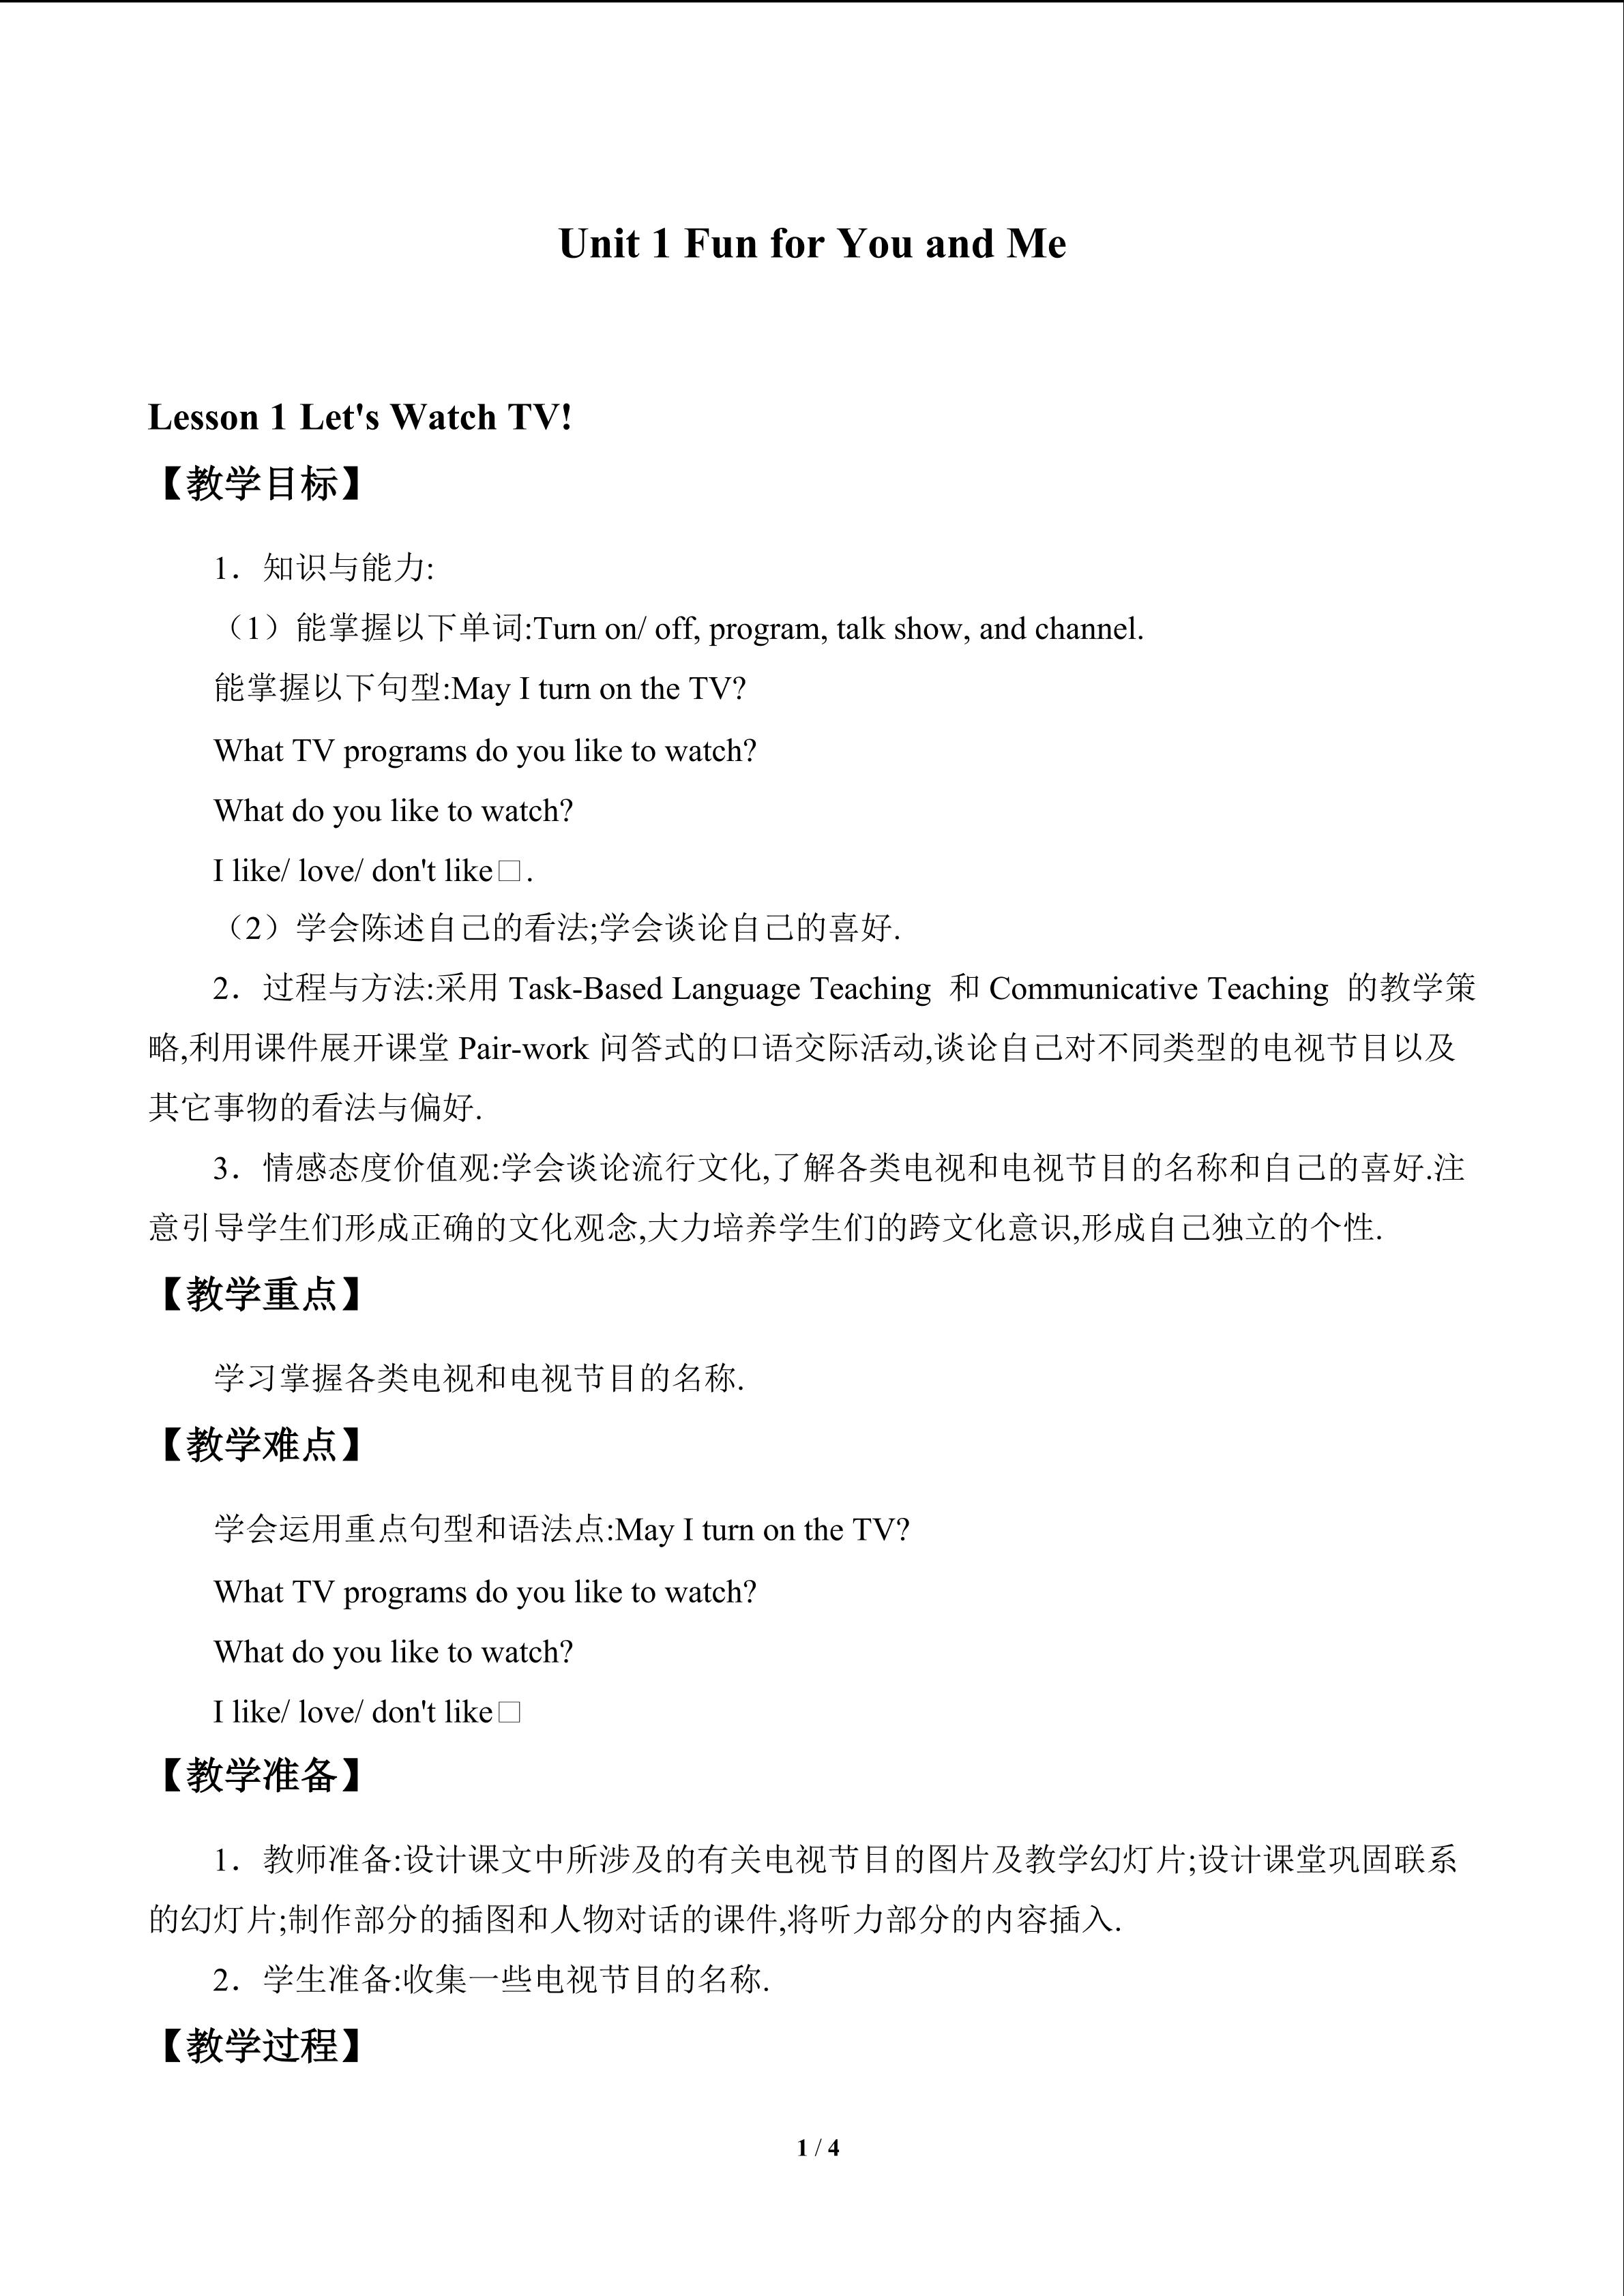 Unit 1 Fun for You and Me_教案1